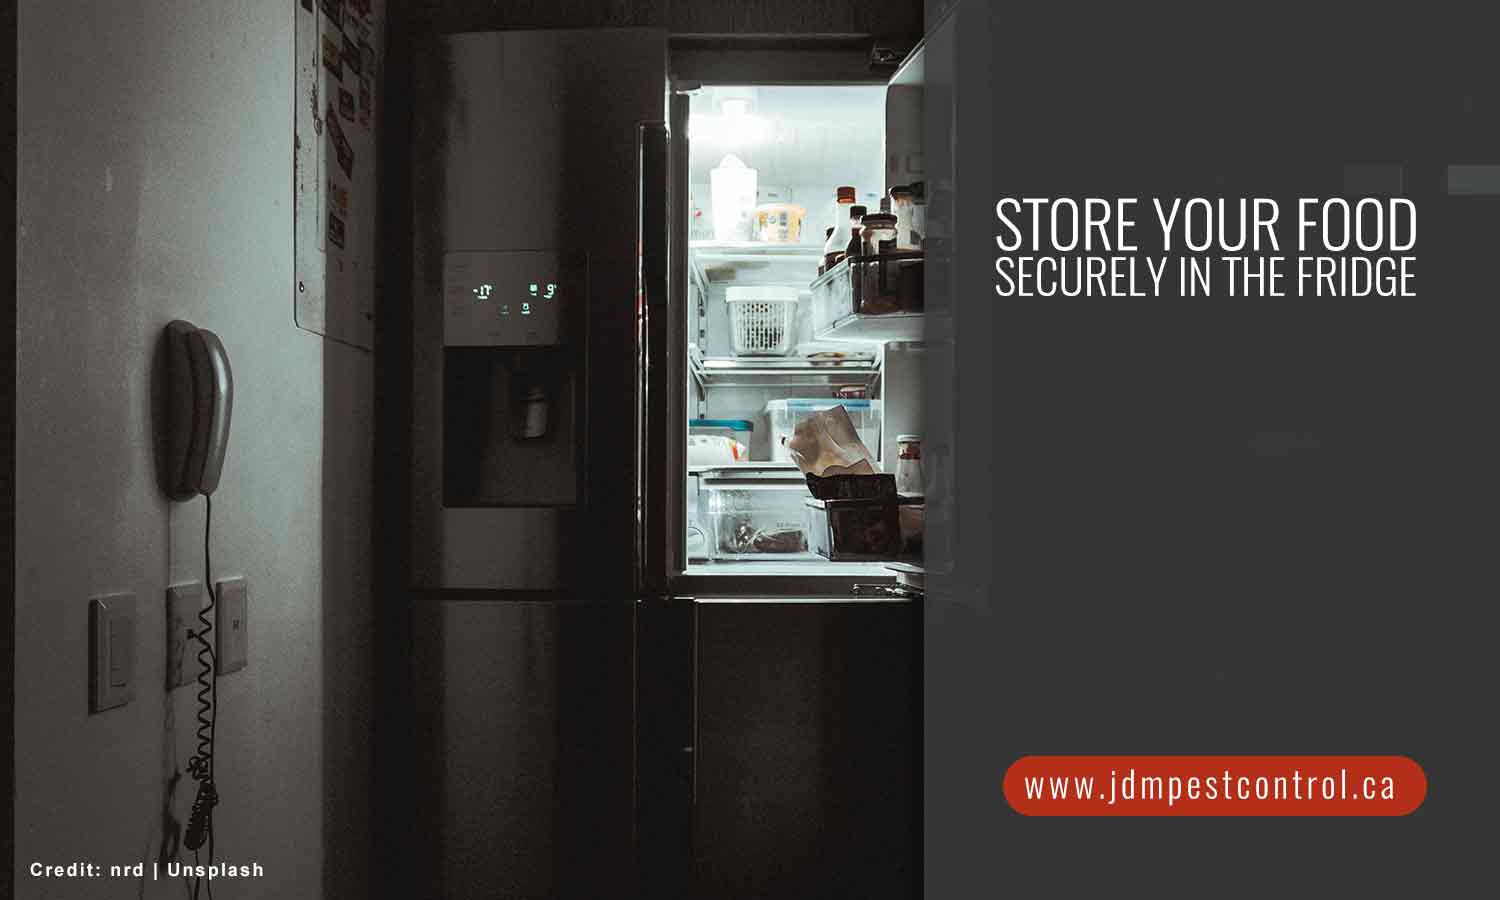 Store your food securely in the fridge